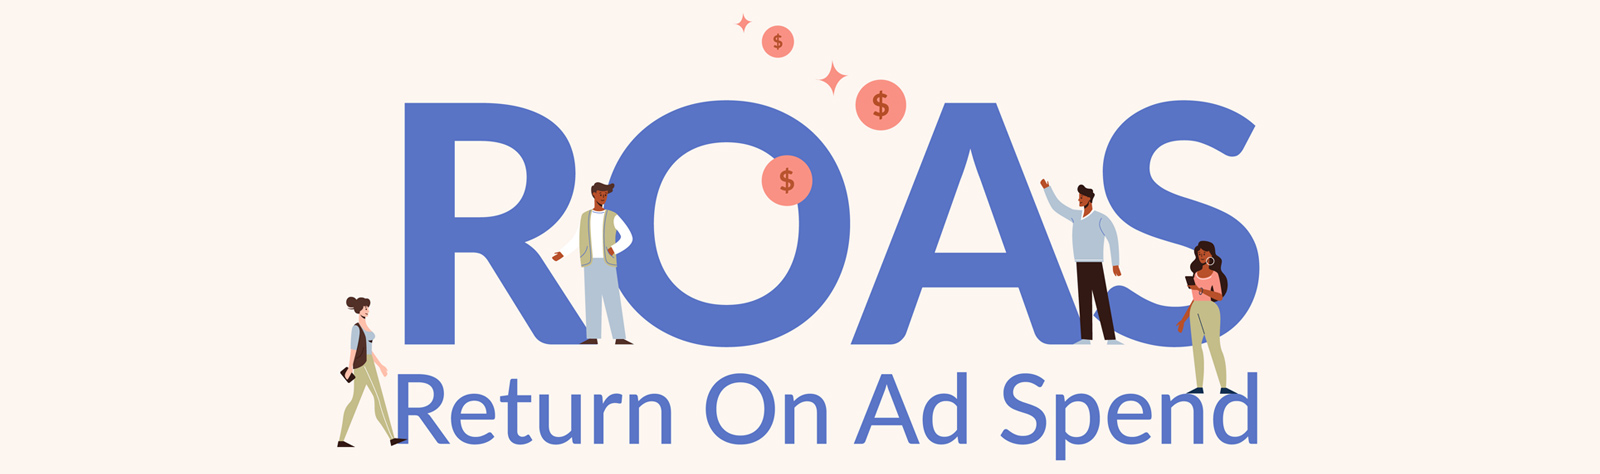 Improving Conversion On Your Paid Search Campaign By Using Return On Ad Spend (ROAS) As Key Metric